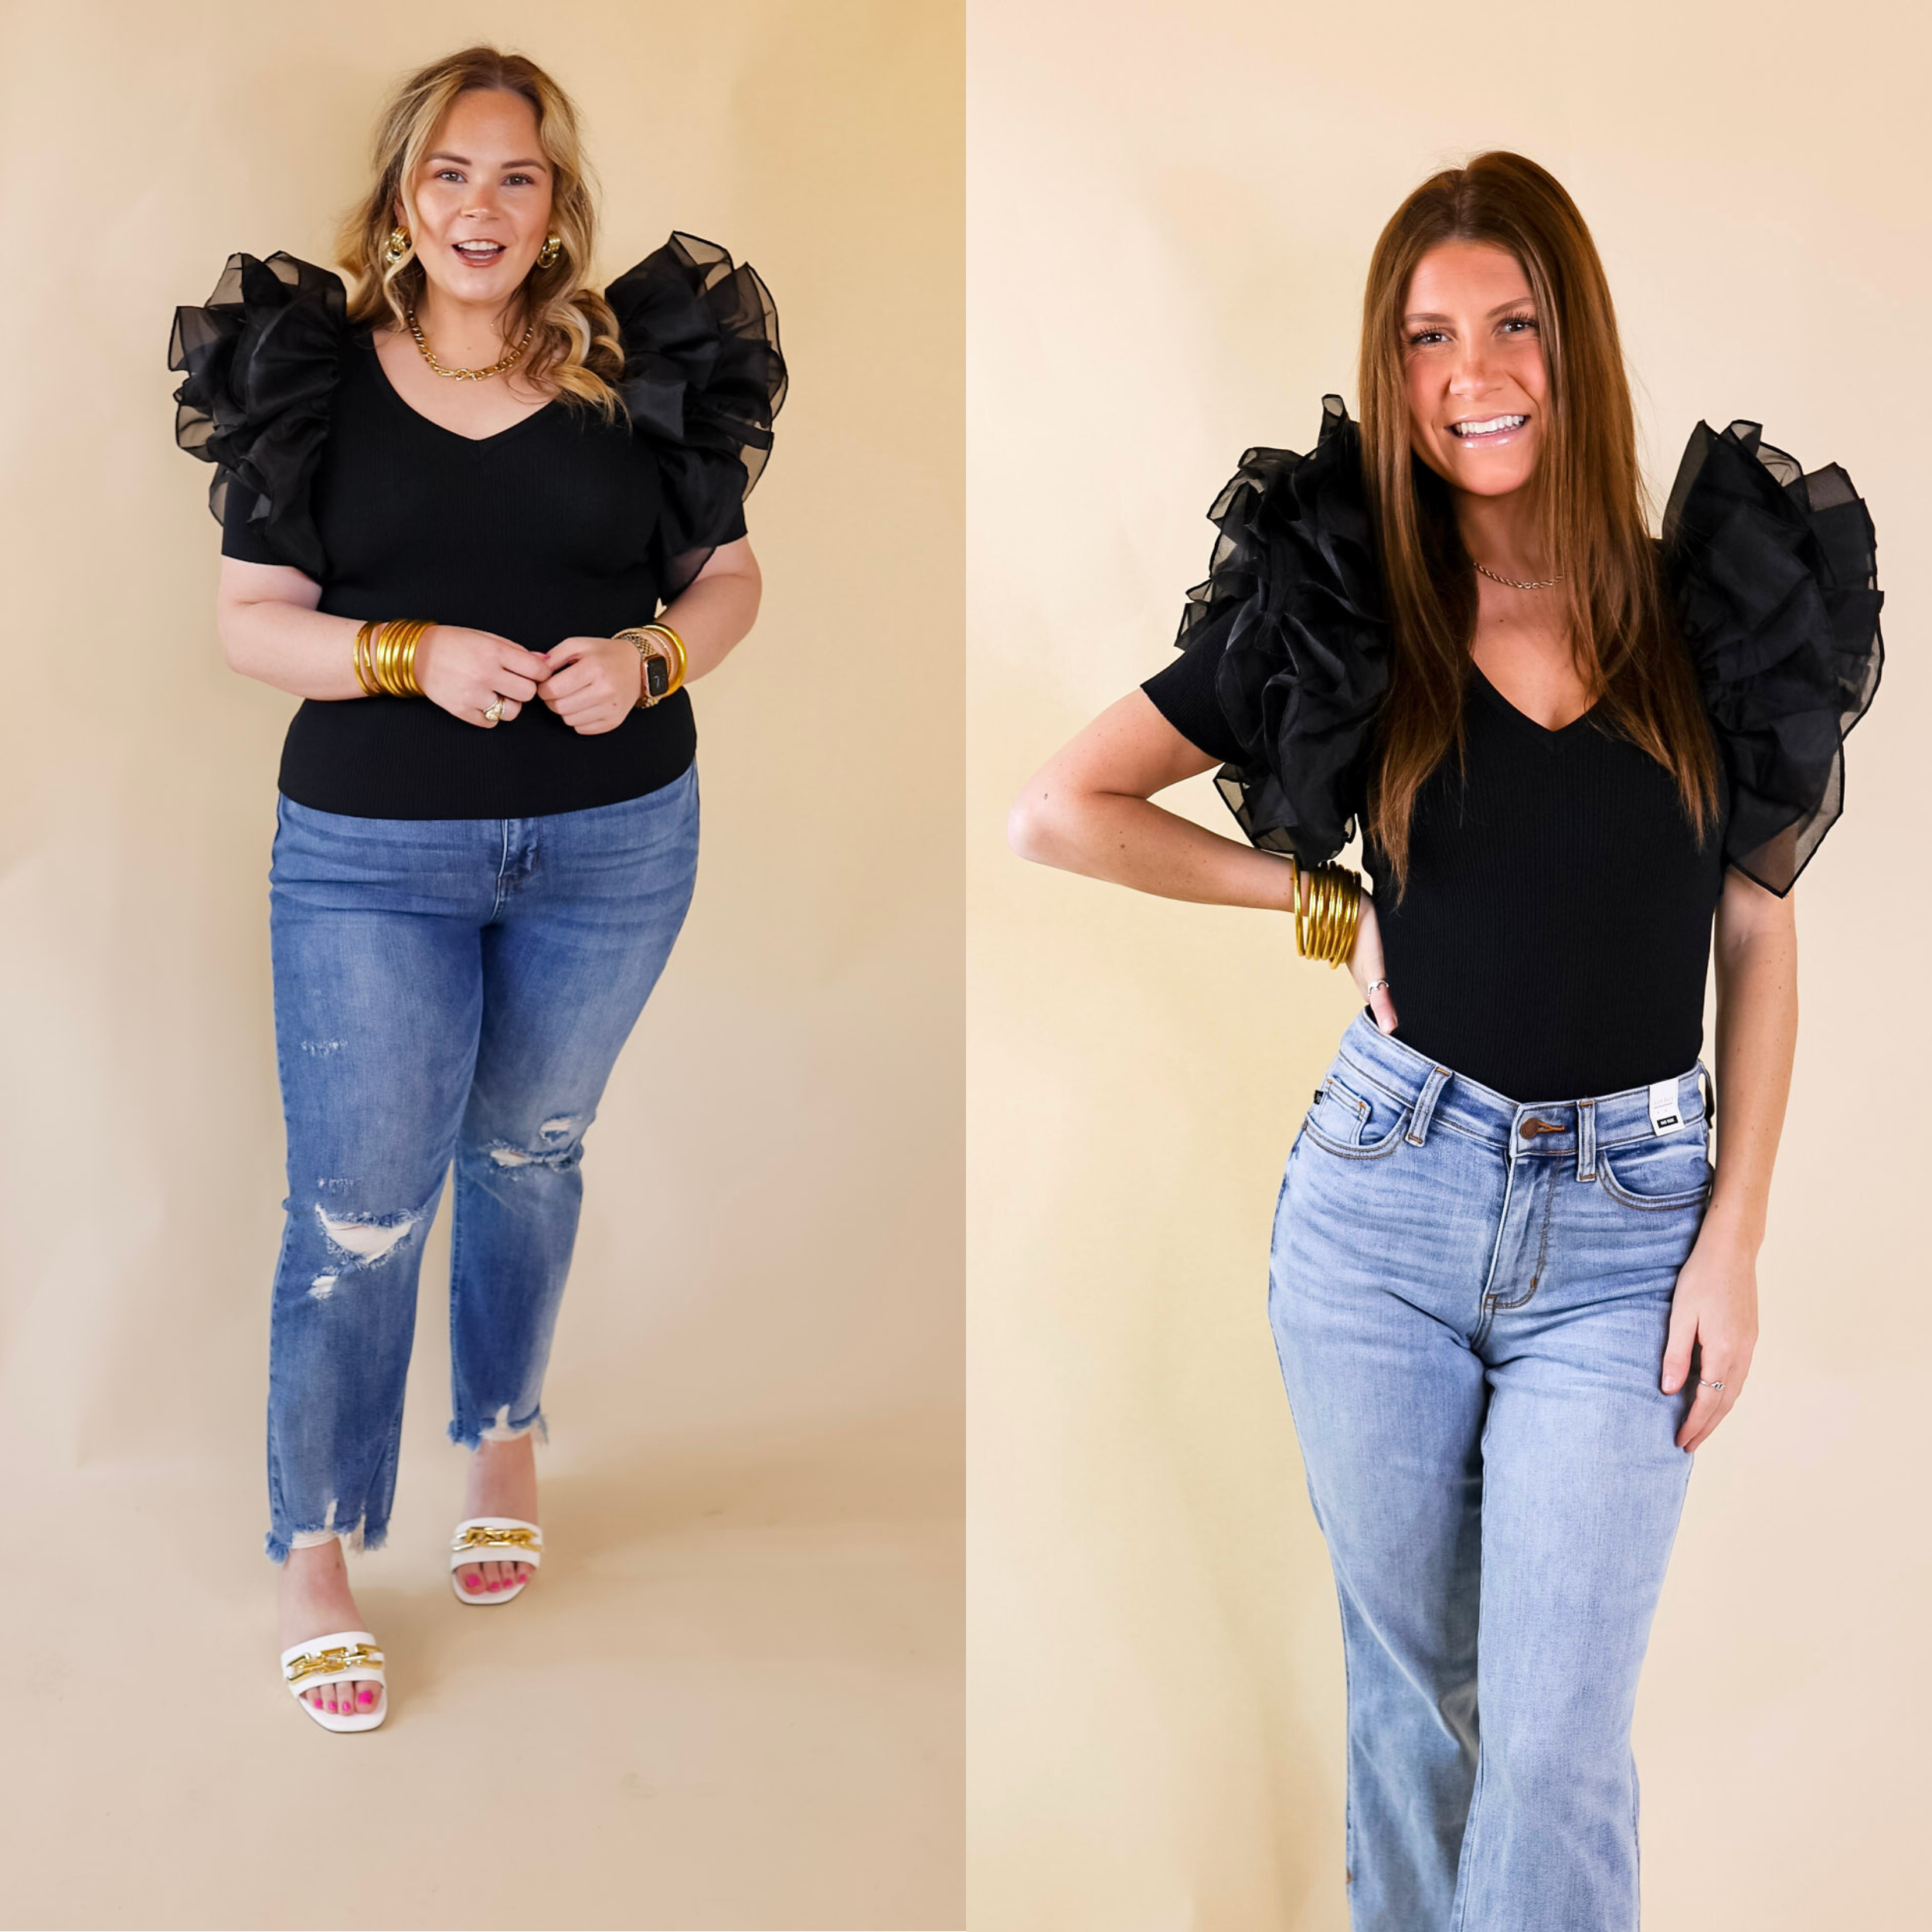 Model is wearing a black fitted top with large ruffle sleeves. Model has this top paired with distressed jeans, white heels, and gold jewelry.